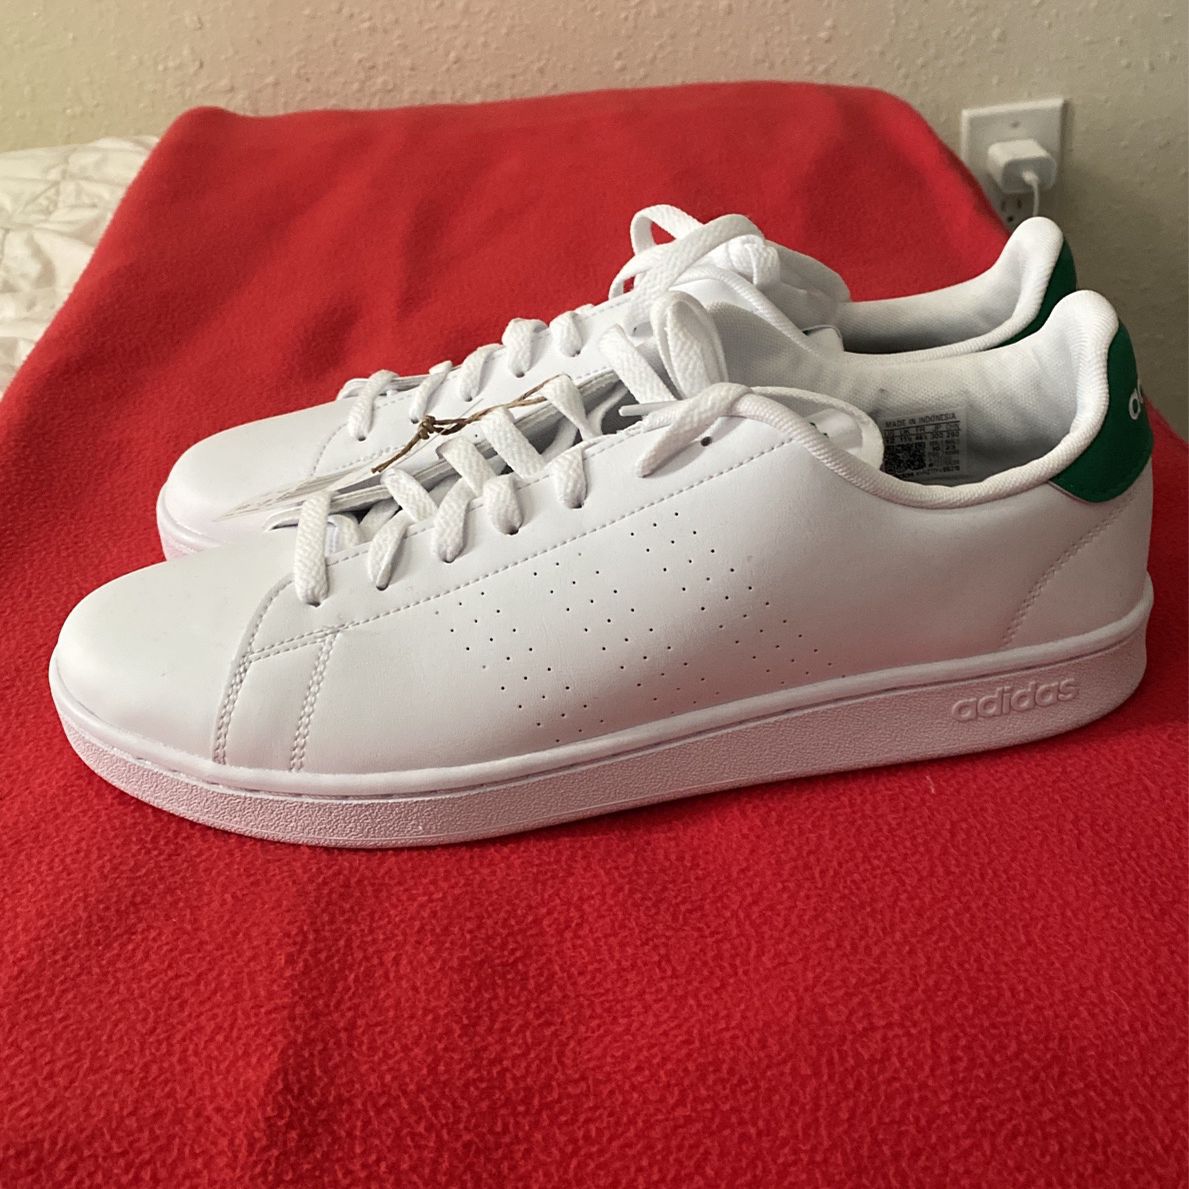 Tennis Shoes Adidas green All White Size 12